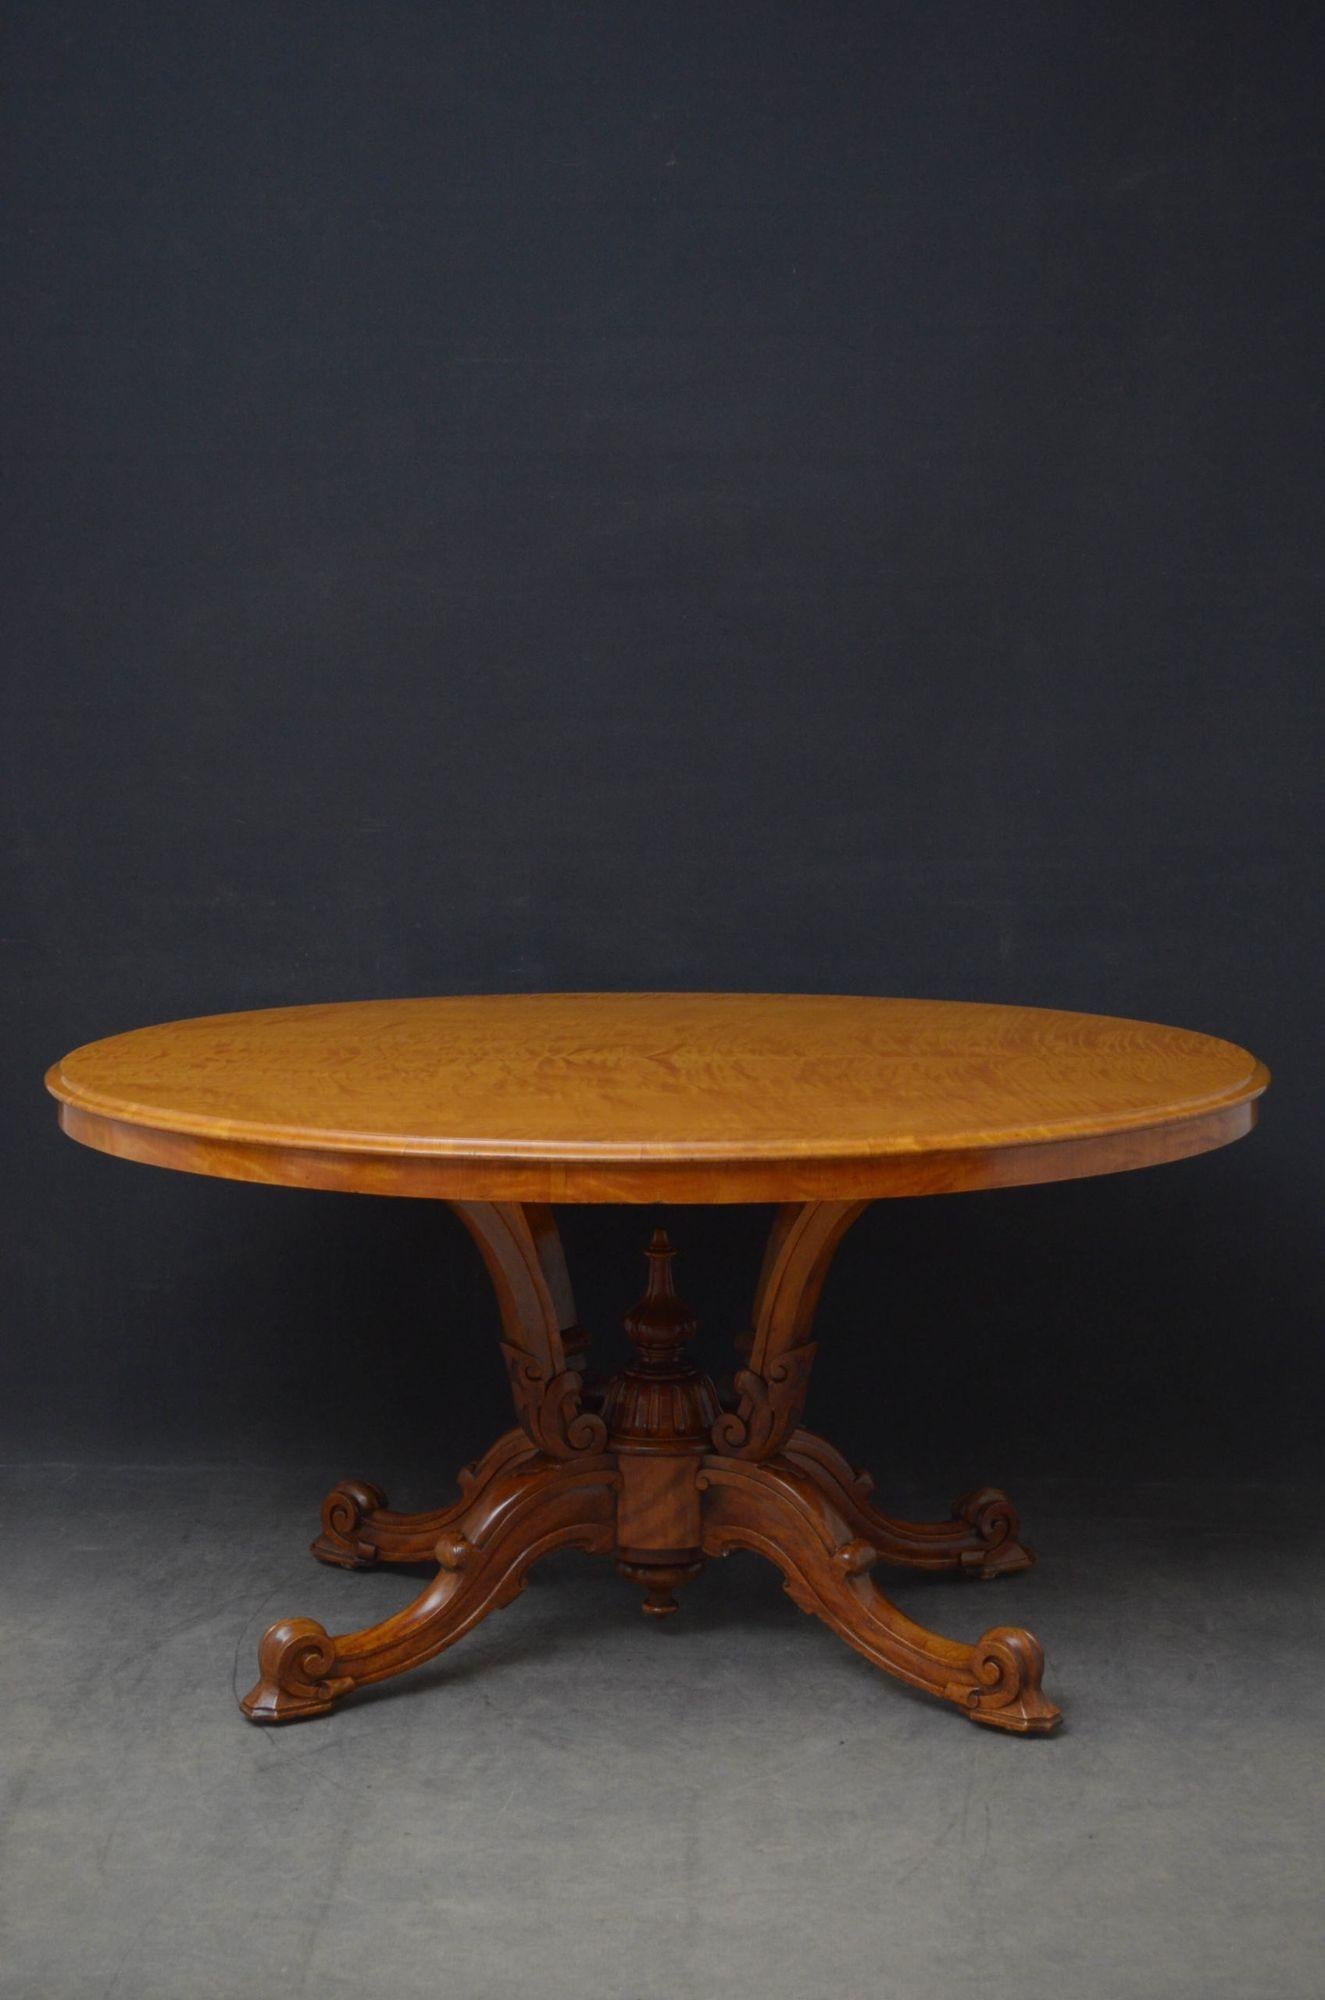 19th Century Rare Victorian Satinwood Centre Table / Dining Table For Sale